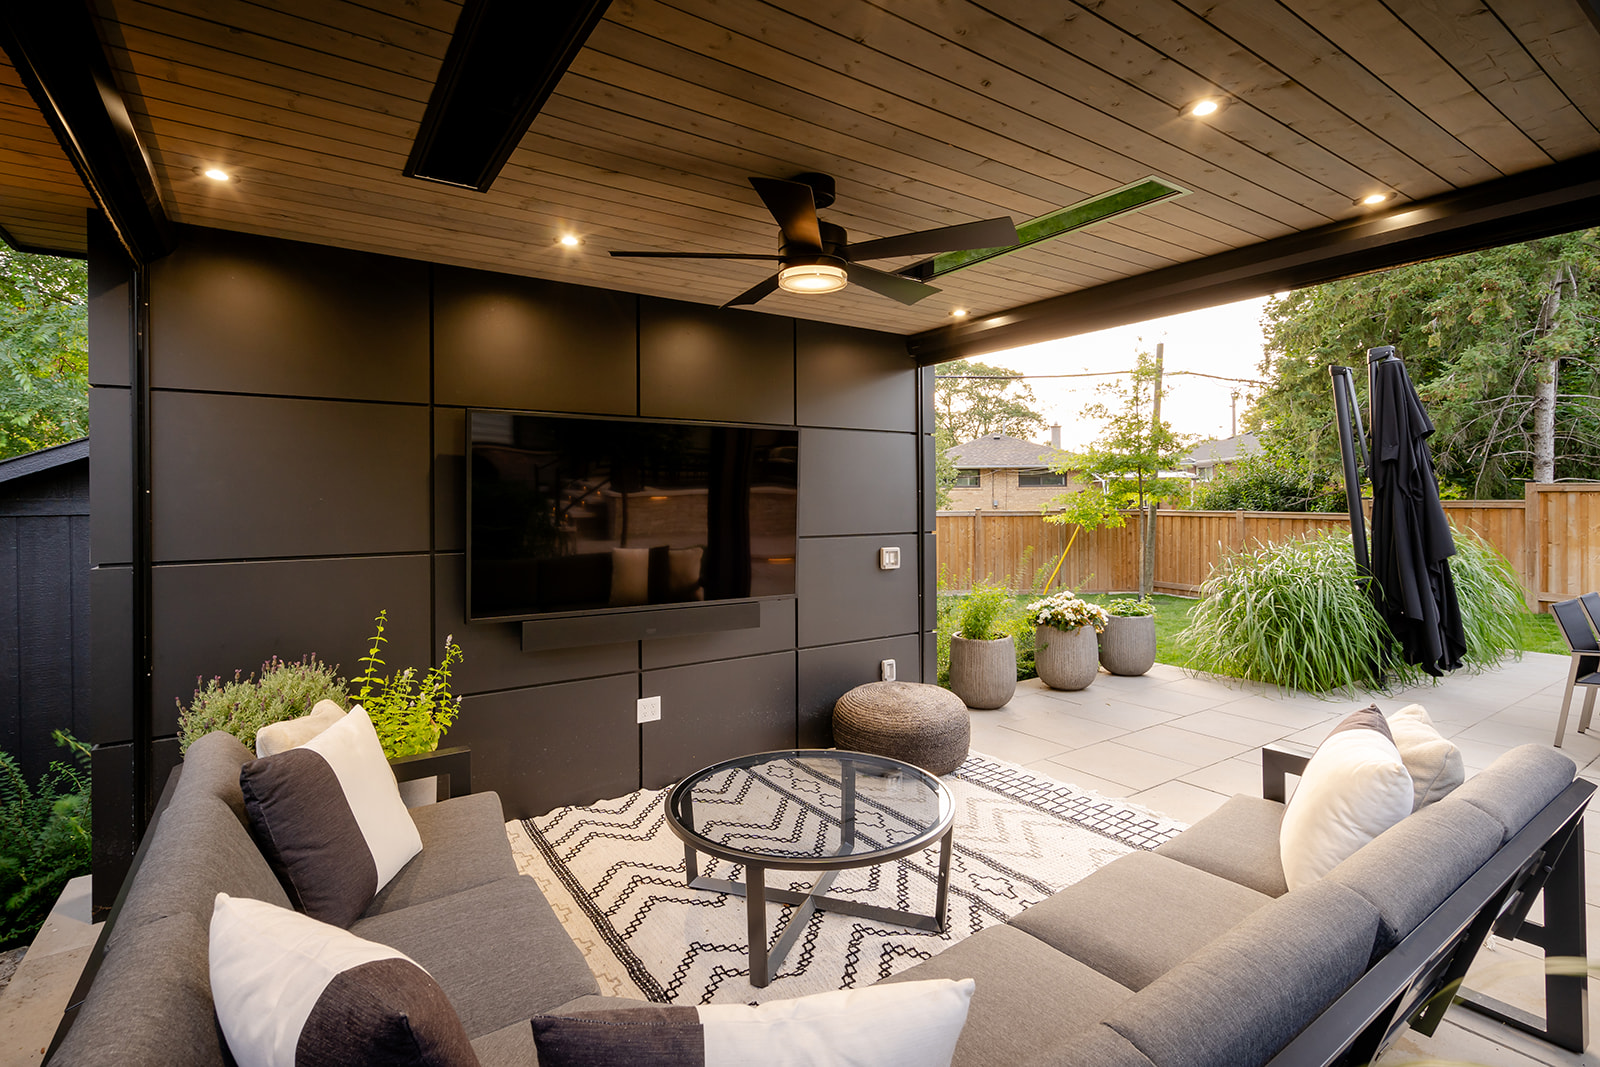 An outdoor patio set with cushions on underneath the gazebo with a tv on the wall.